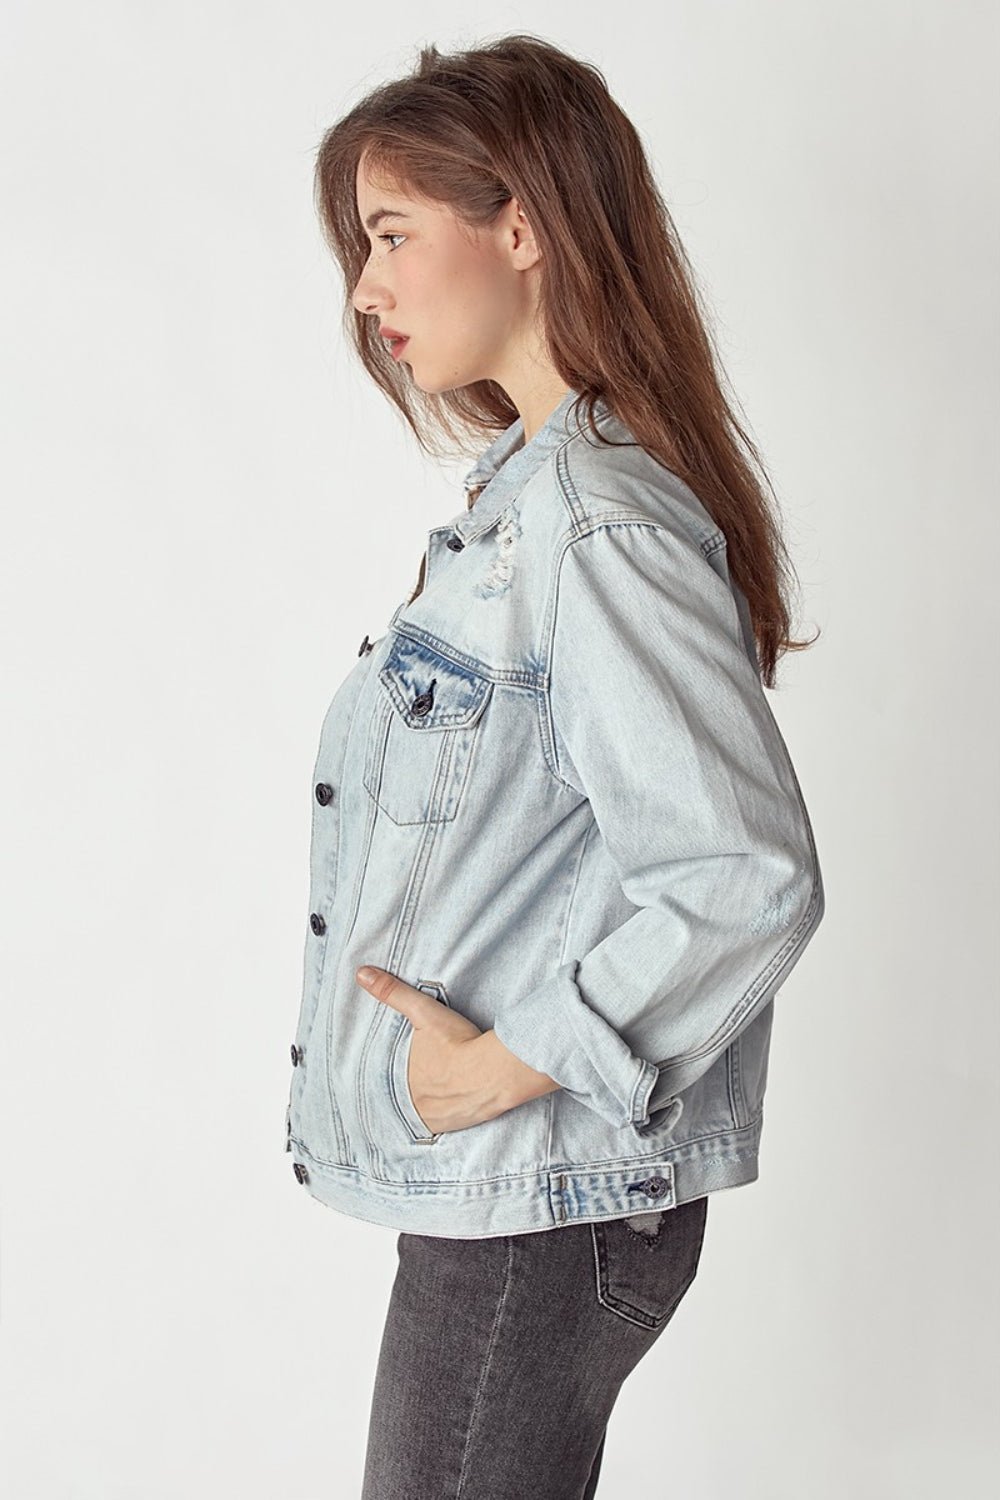 RISEN Distressed Button Up Jacket - Happily Ever Atchison Shop Co.